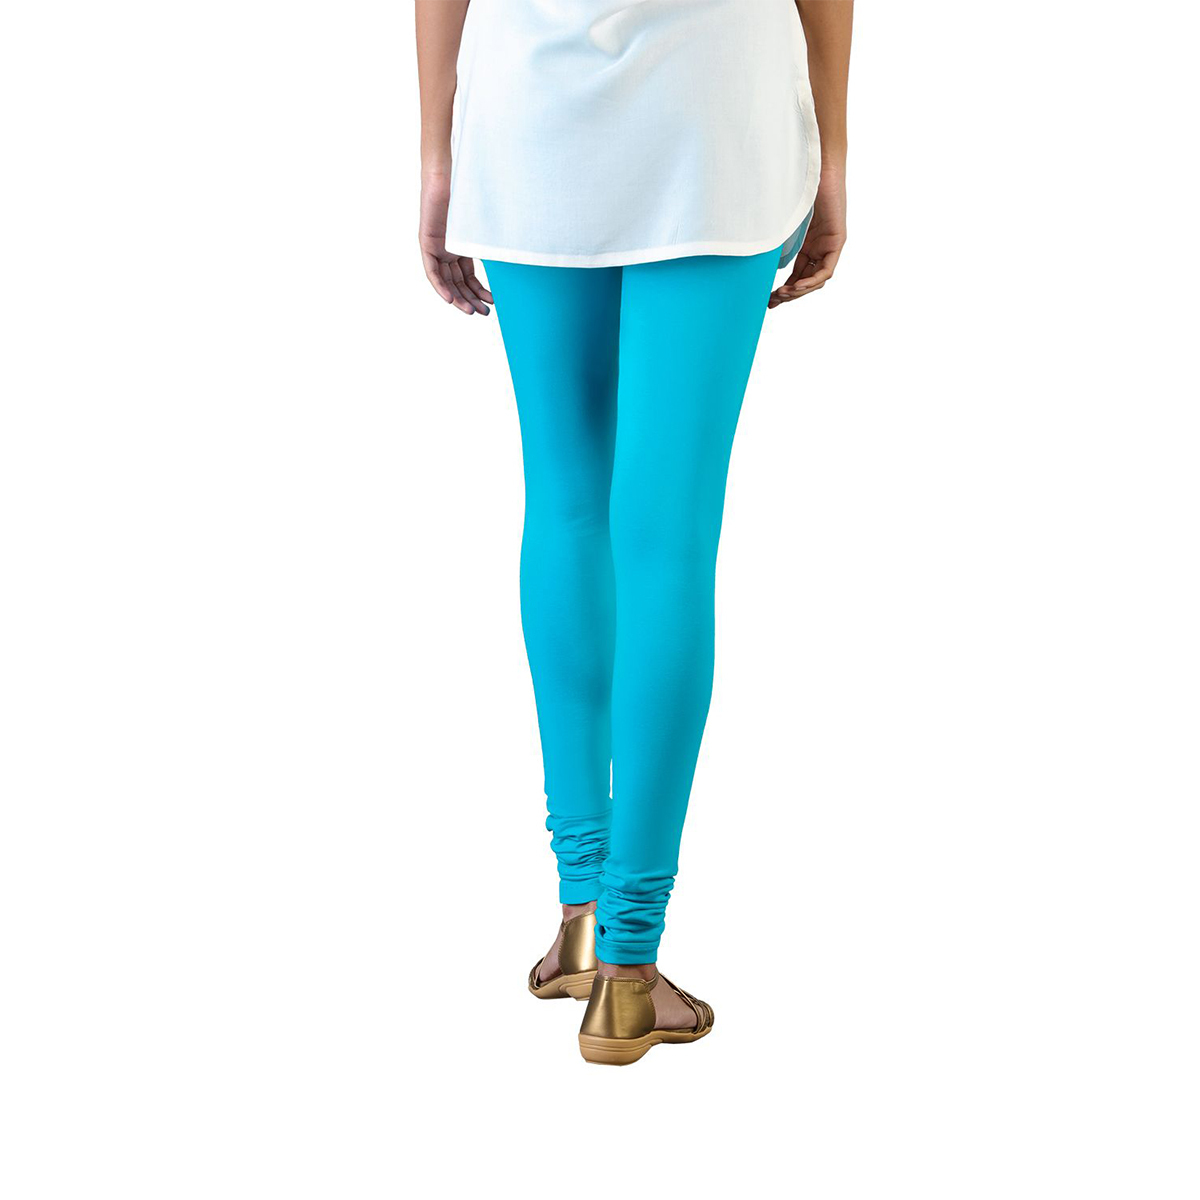 Twin Birds Women Solid Colour Churidar Legging with Signature Wide Waistband - Grand Turquoise- Size - Medium